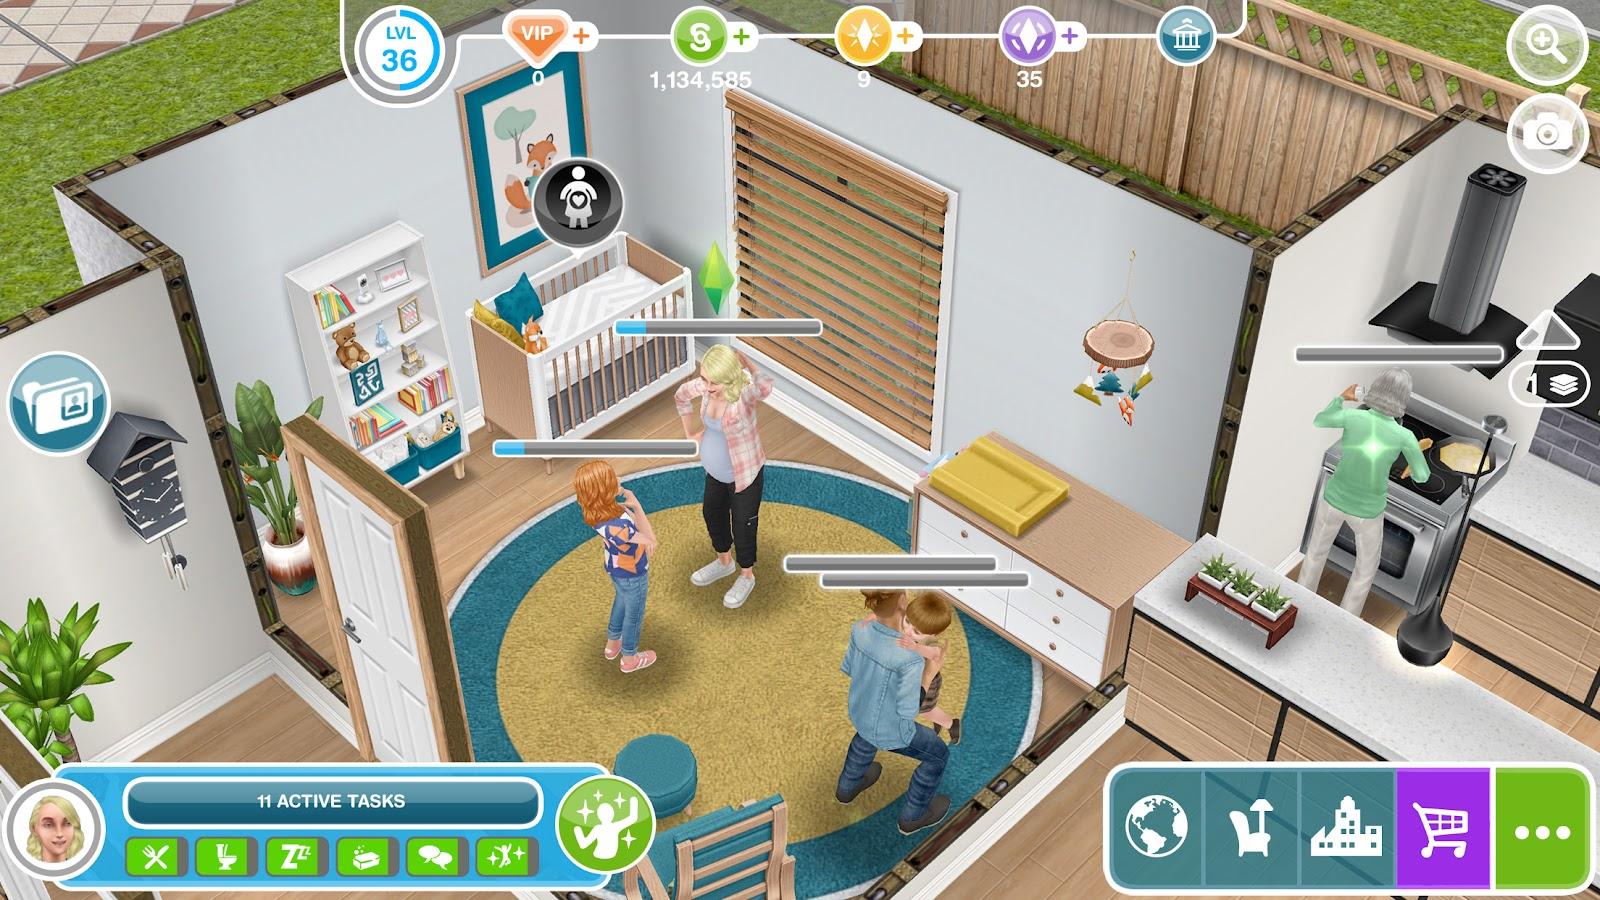 The Sims FreePlay v5.81.0 APK + DATA for Android